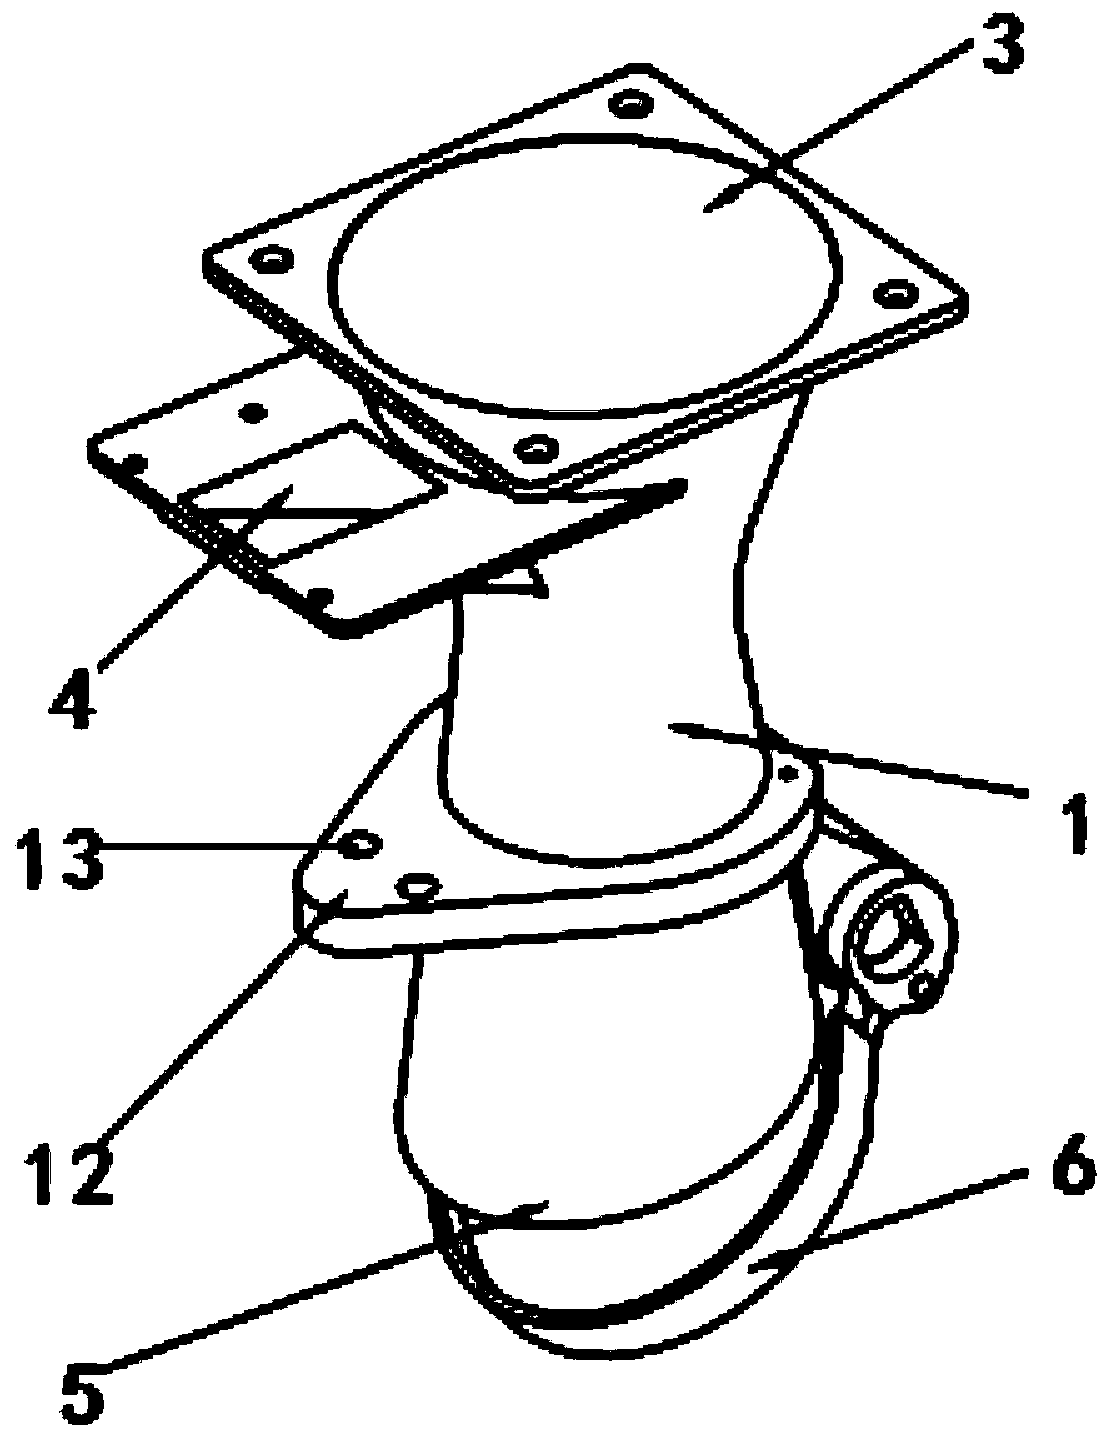 Seed-fertilizer mixed sowing device